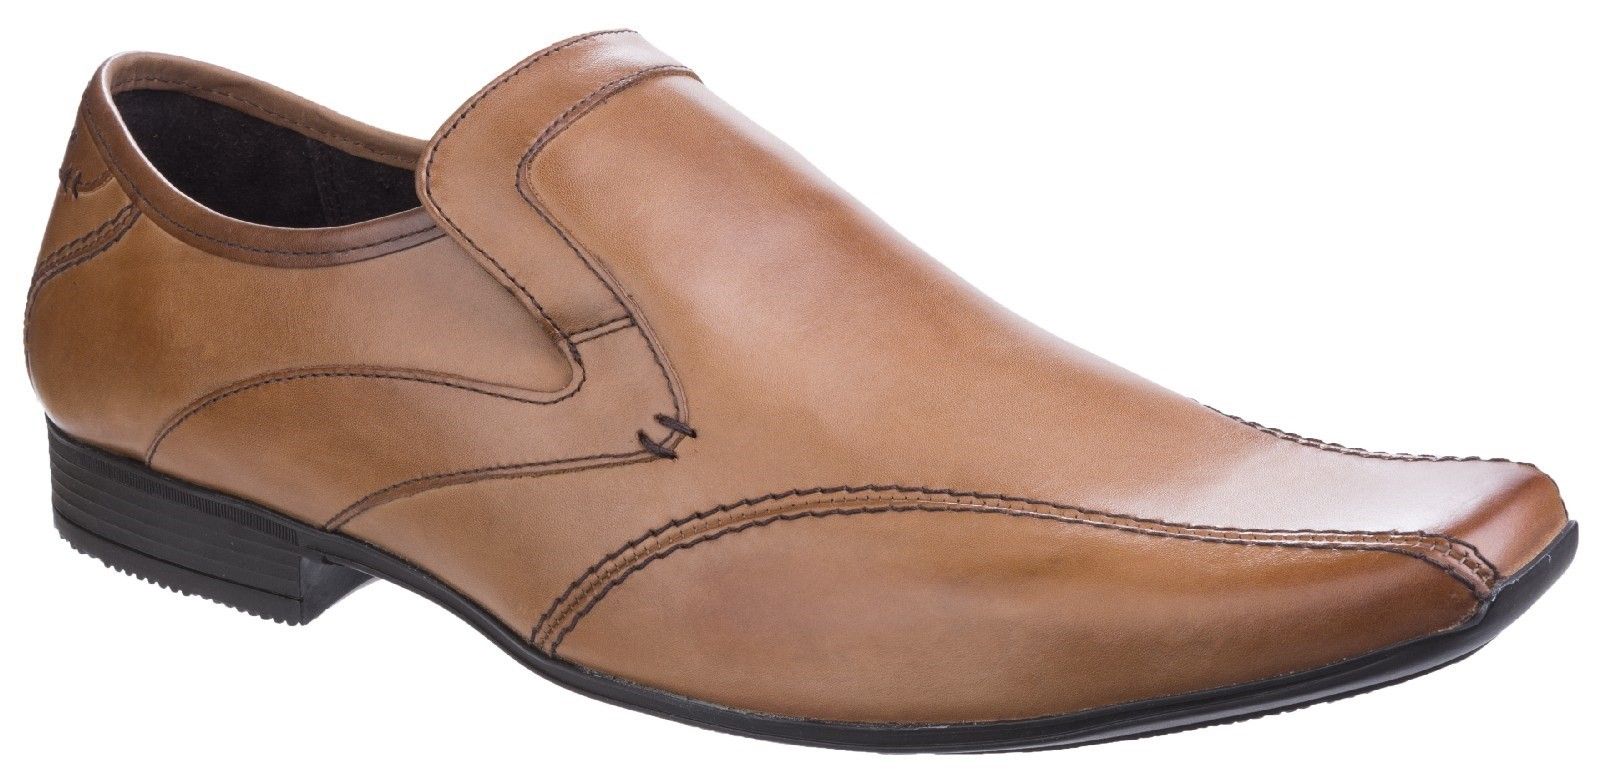 Sphere Excel from the Base London larger size mens shoe collection. Quality rich leather upper gives this loafer a traditionally smart look, whilst soft suede lining makes this shoe comfortable to wear. Designed for guys blessed with bigger feet. High quality leather uppers give a smart and sophisticated look. 
Quality suede lining provides added comfort with a soft touch. 
Rubber sole provides added grip to give a secure step.